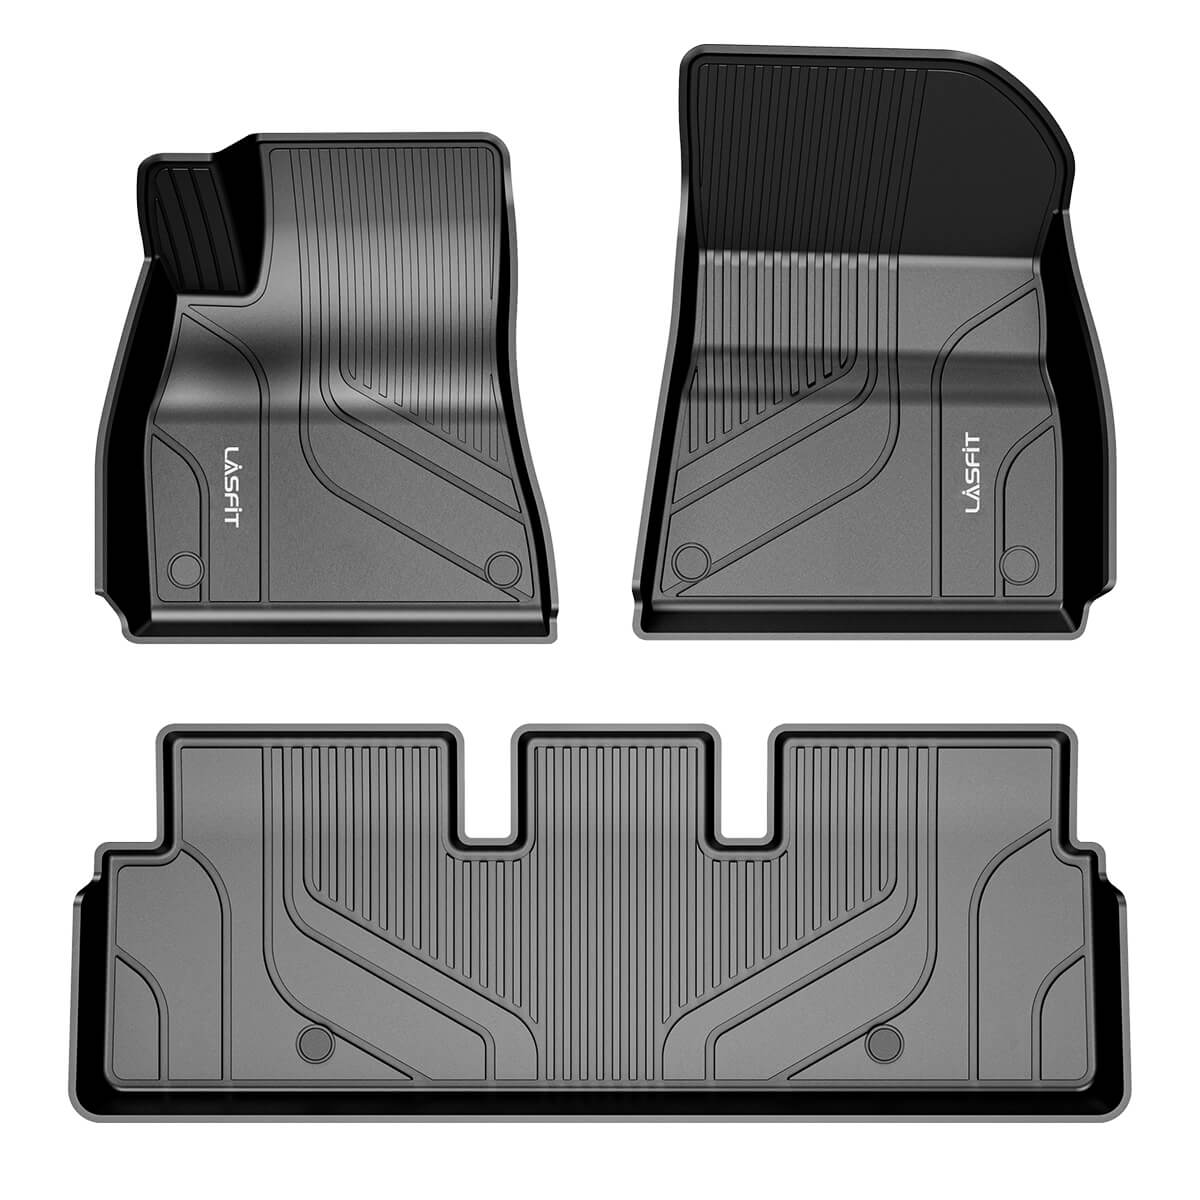 2011 Ford Fusion All-Weather Car Mats - Flexible Rubber Floor Mats